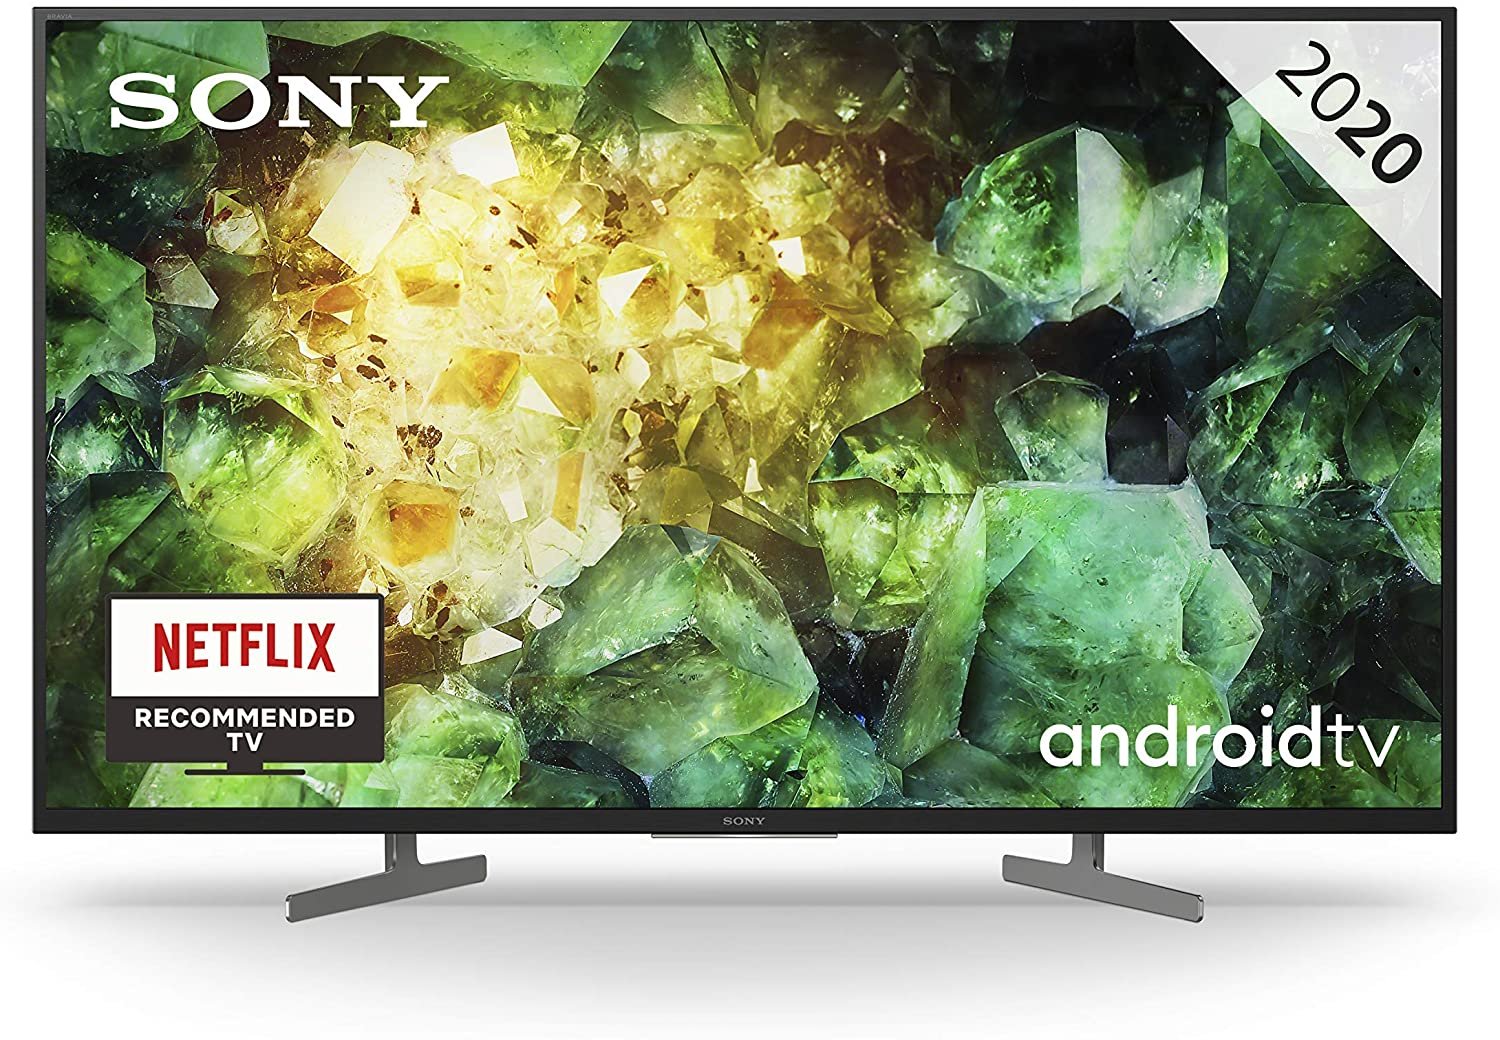 Sony KD 43XH8196 HDR Android TV mejor televisor